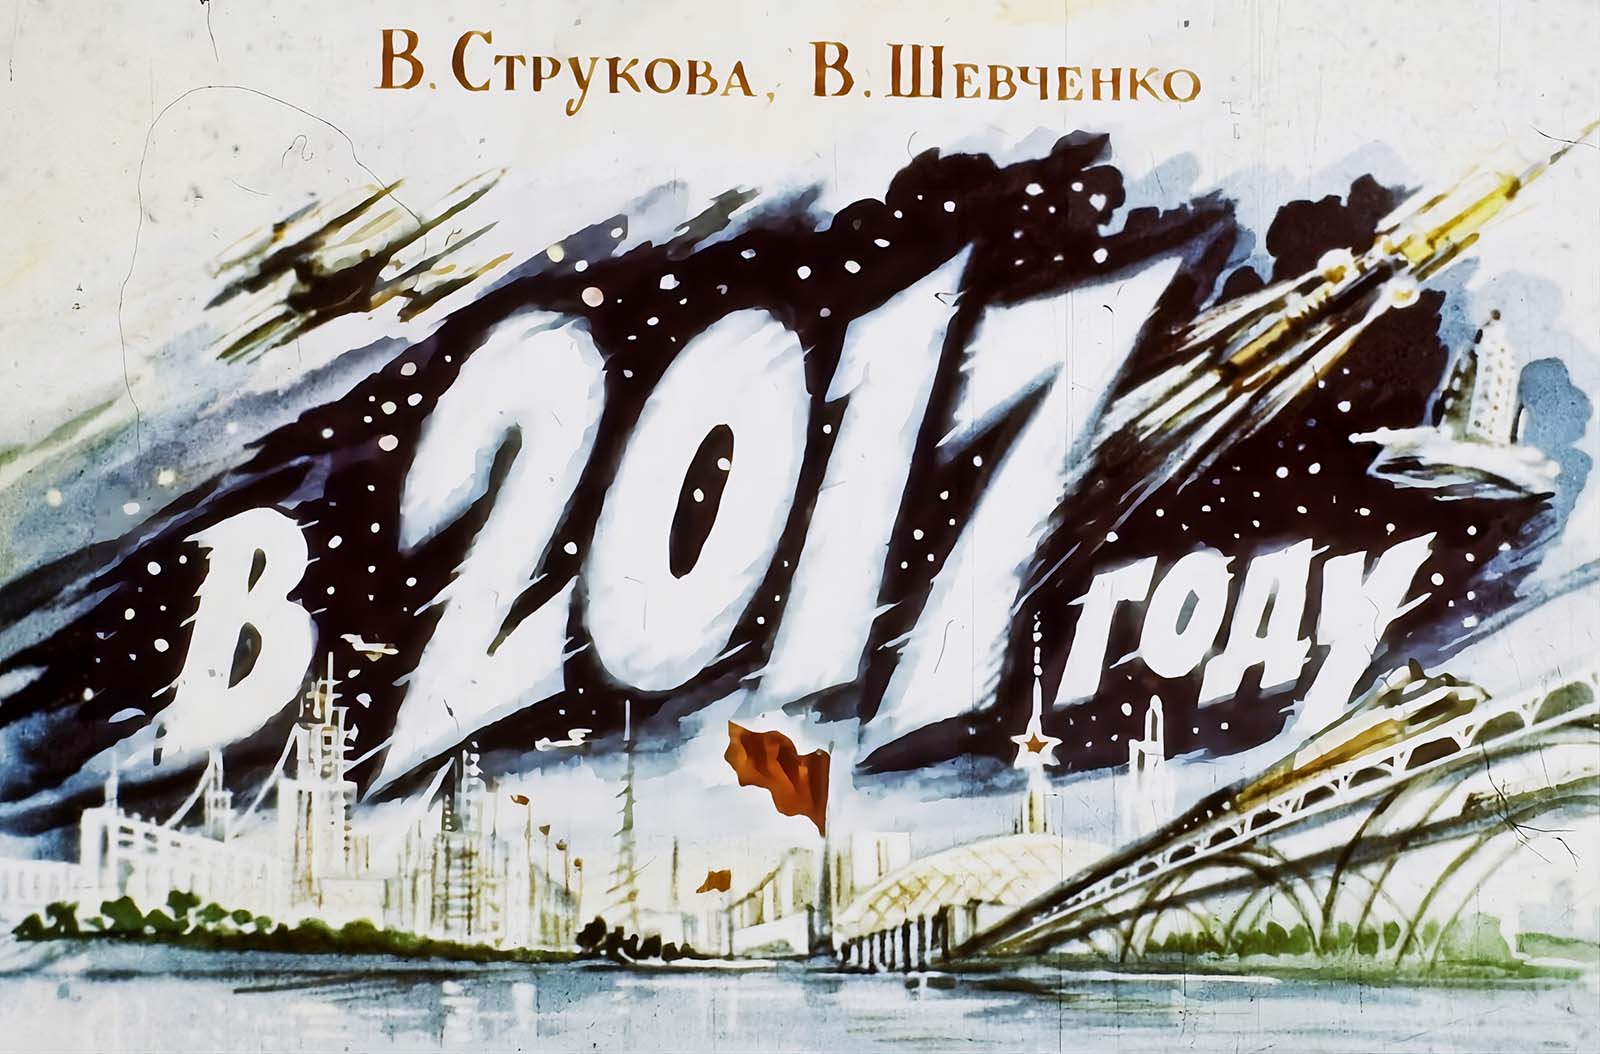 "Soviet Retro Visions: How Soviets Imagined the Year 2017 in 1960